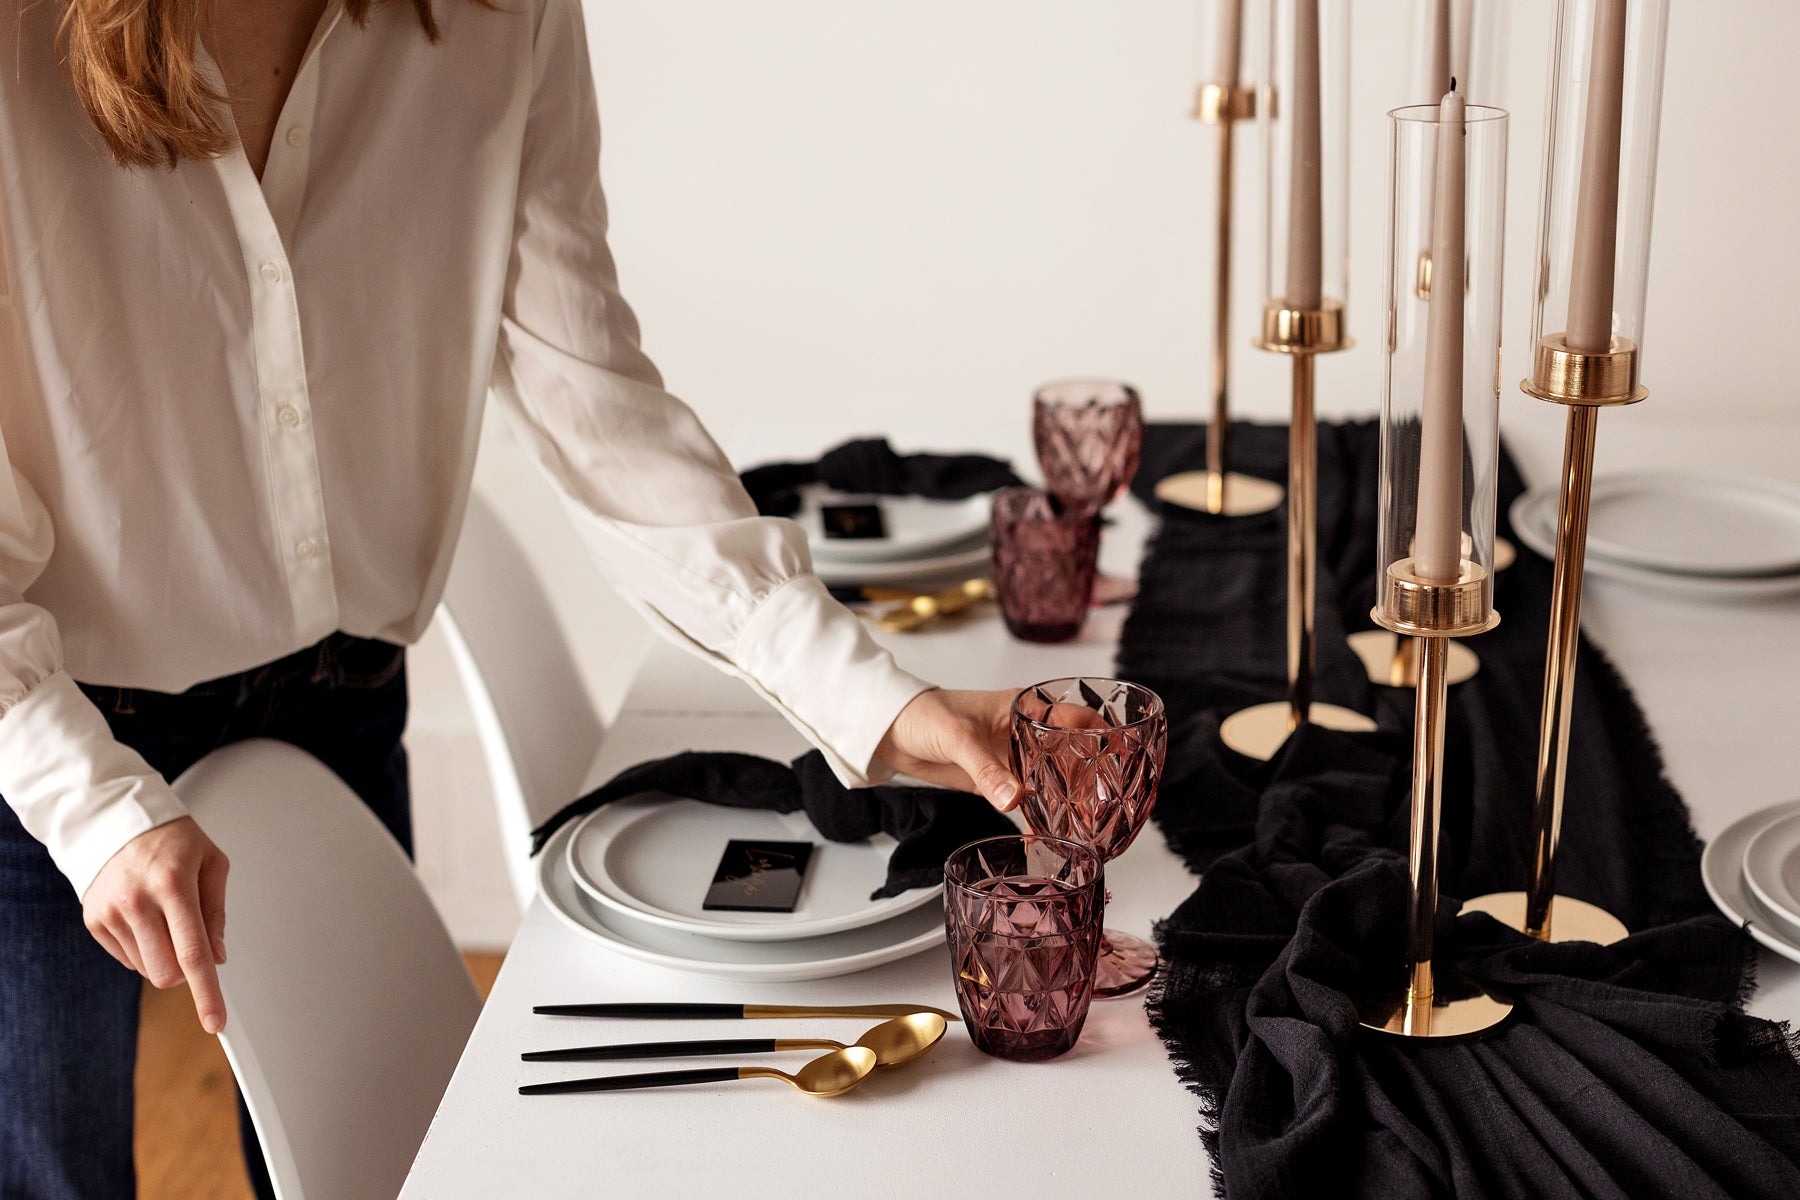 Rental of Gold Candle Holder – Affair Lifestyle Boutique